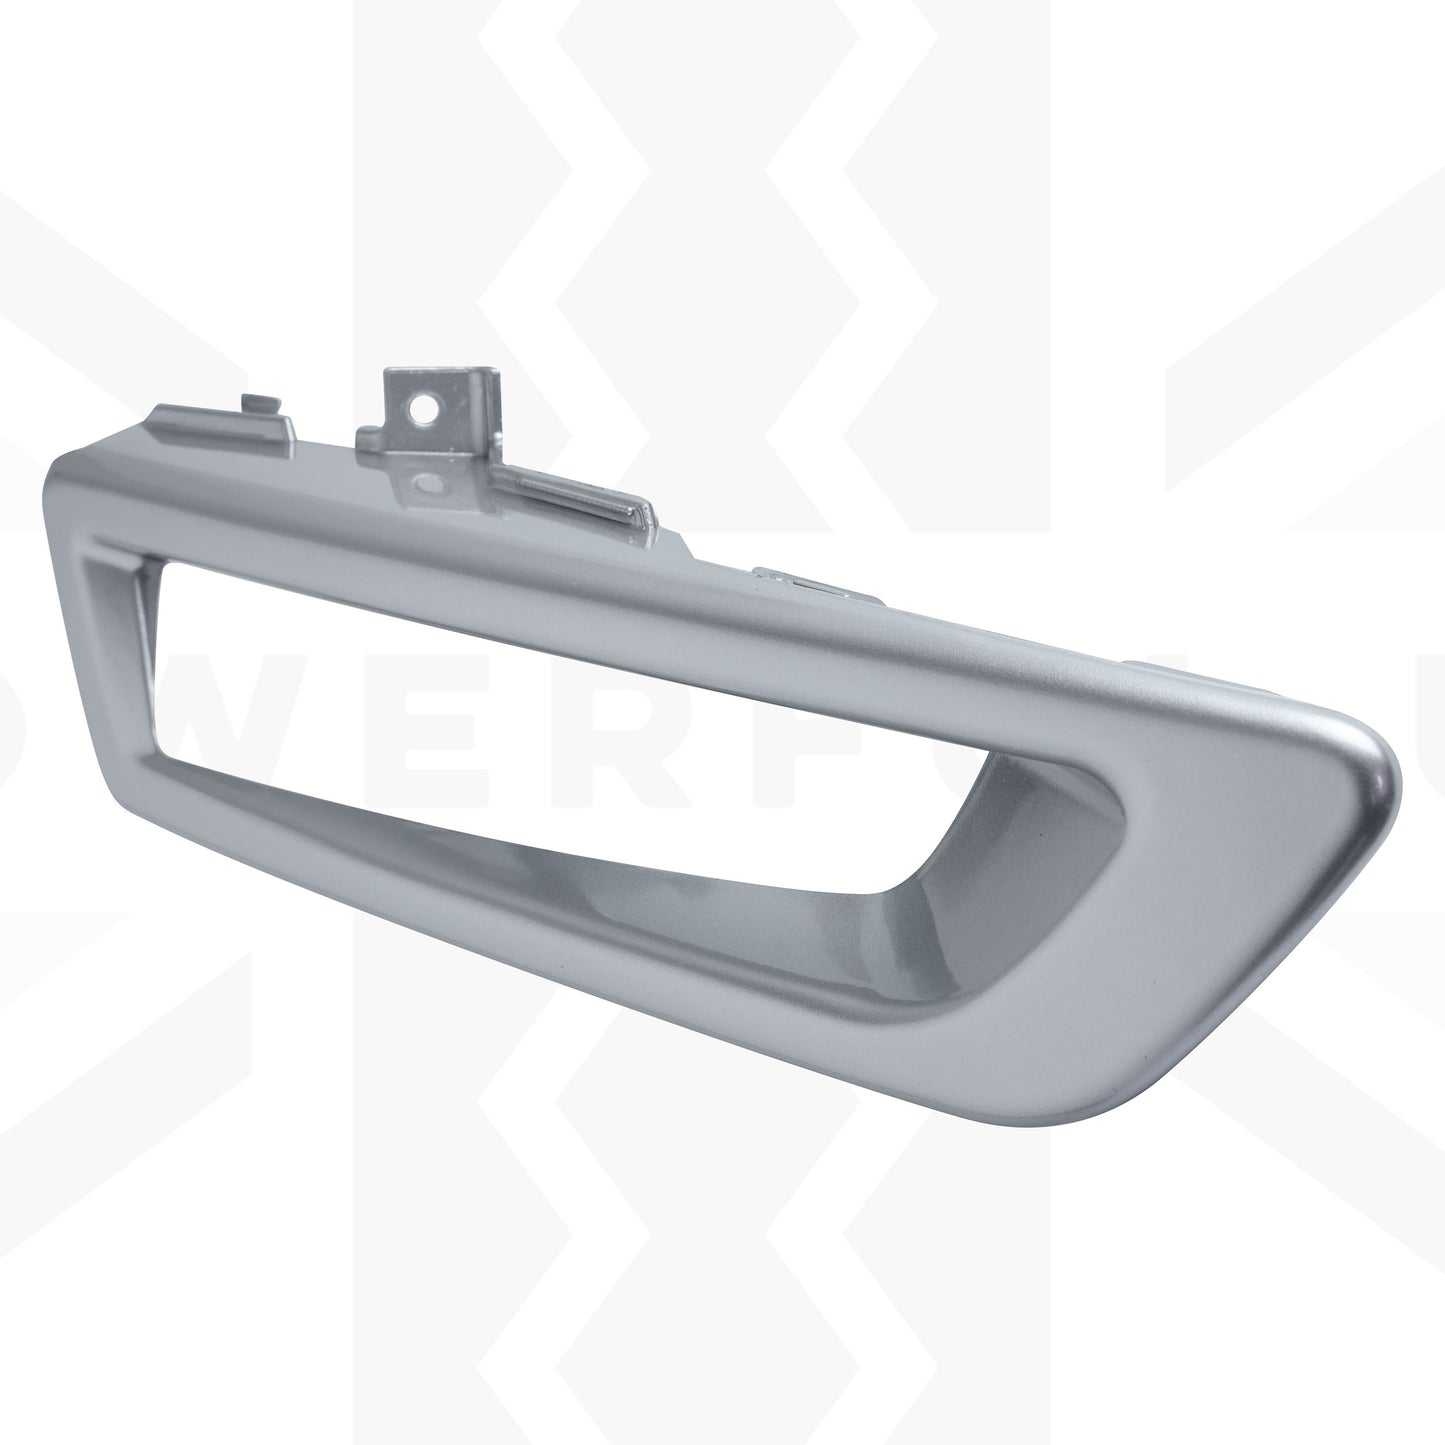 Silver Fog Light Surround for Land Rover Discovery Sport 2015-19 - Right